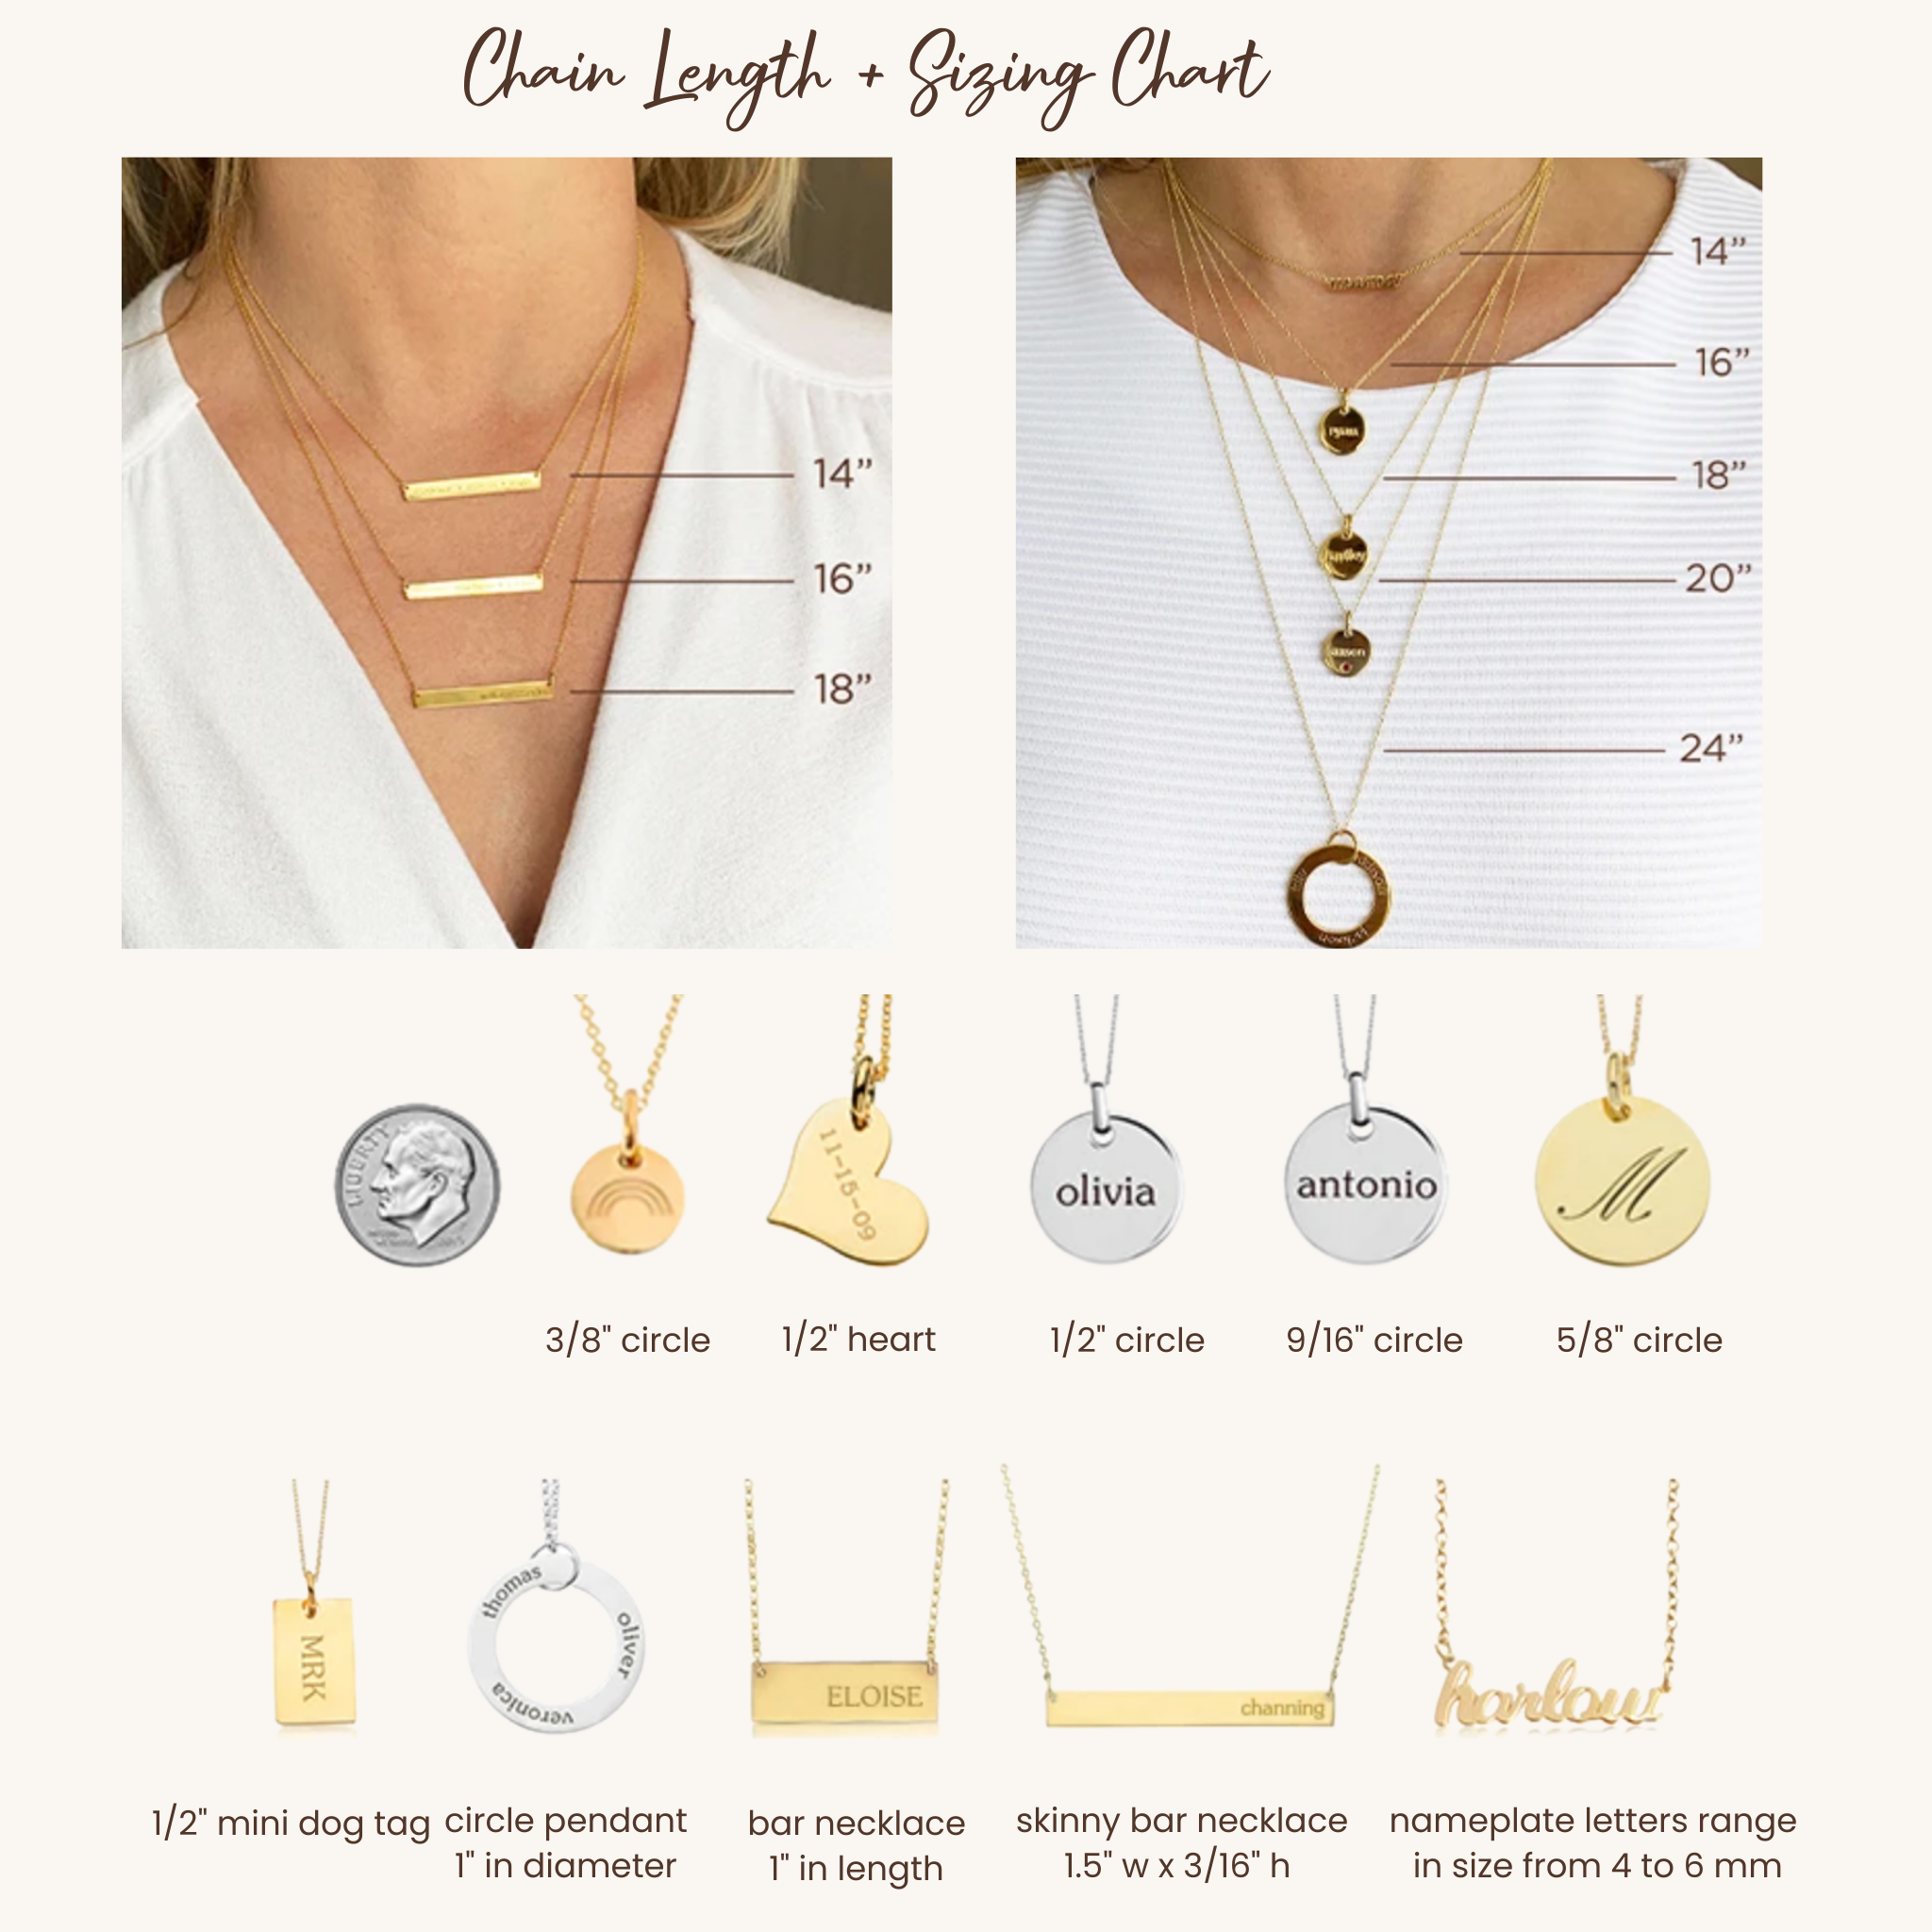 27 Necklace Lengths Chart Images, Stock Photos, 3D objects, & Vectors |  Shutterstock